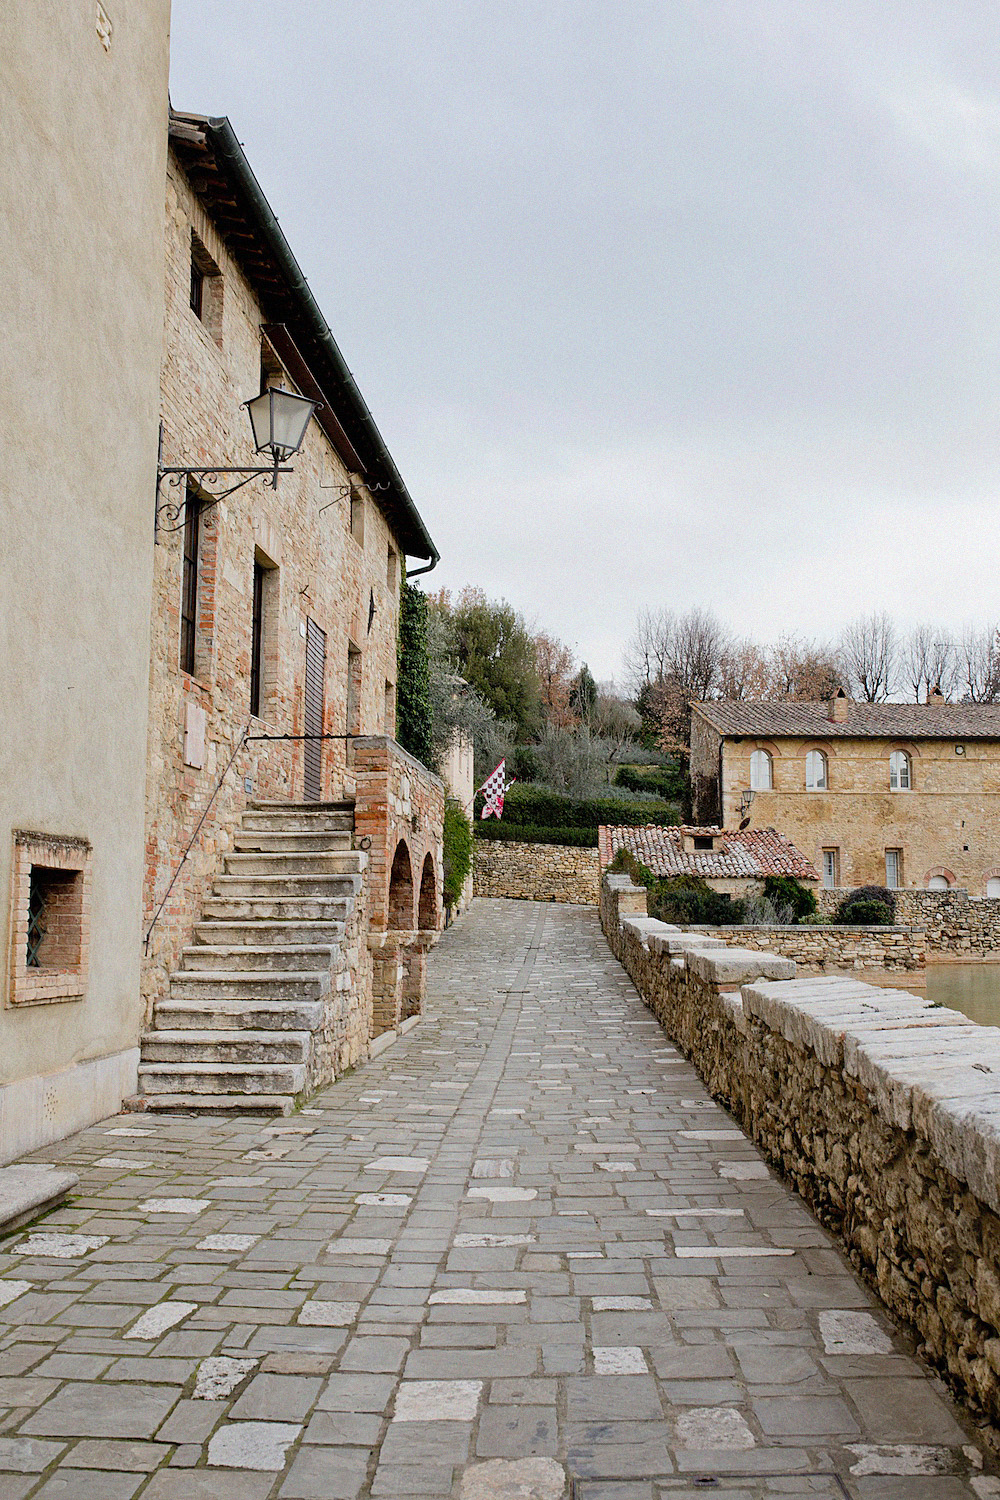 bagno vignoni tuscany cute villages to visit val d'orcia